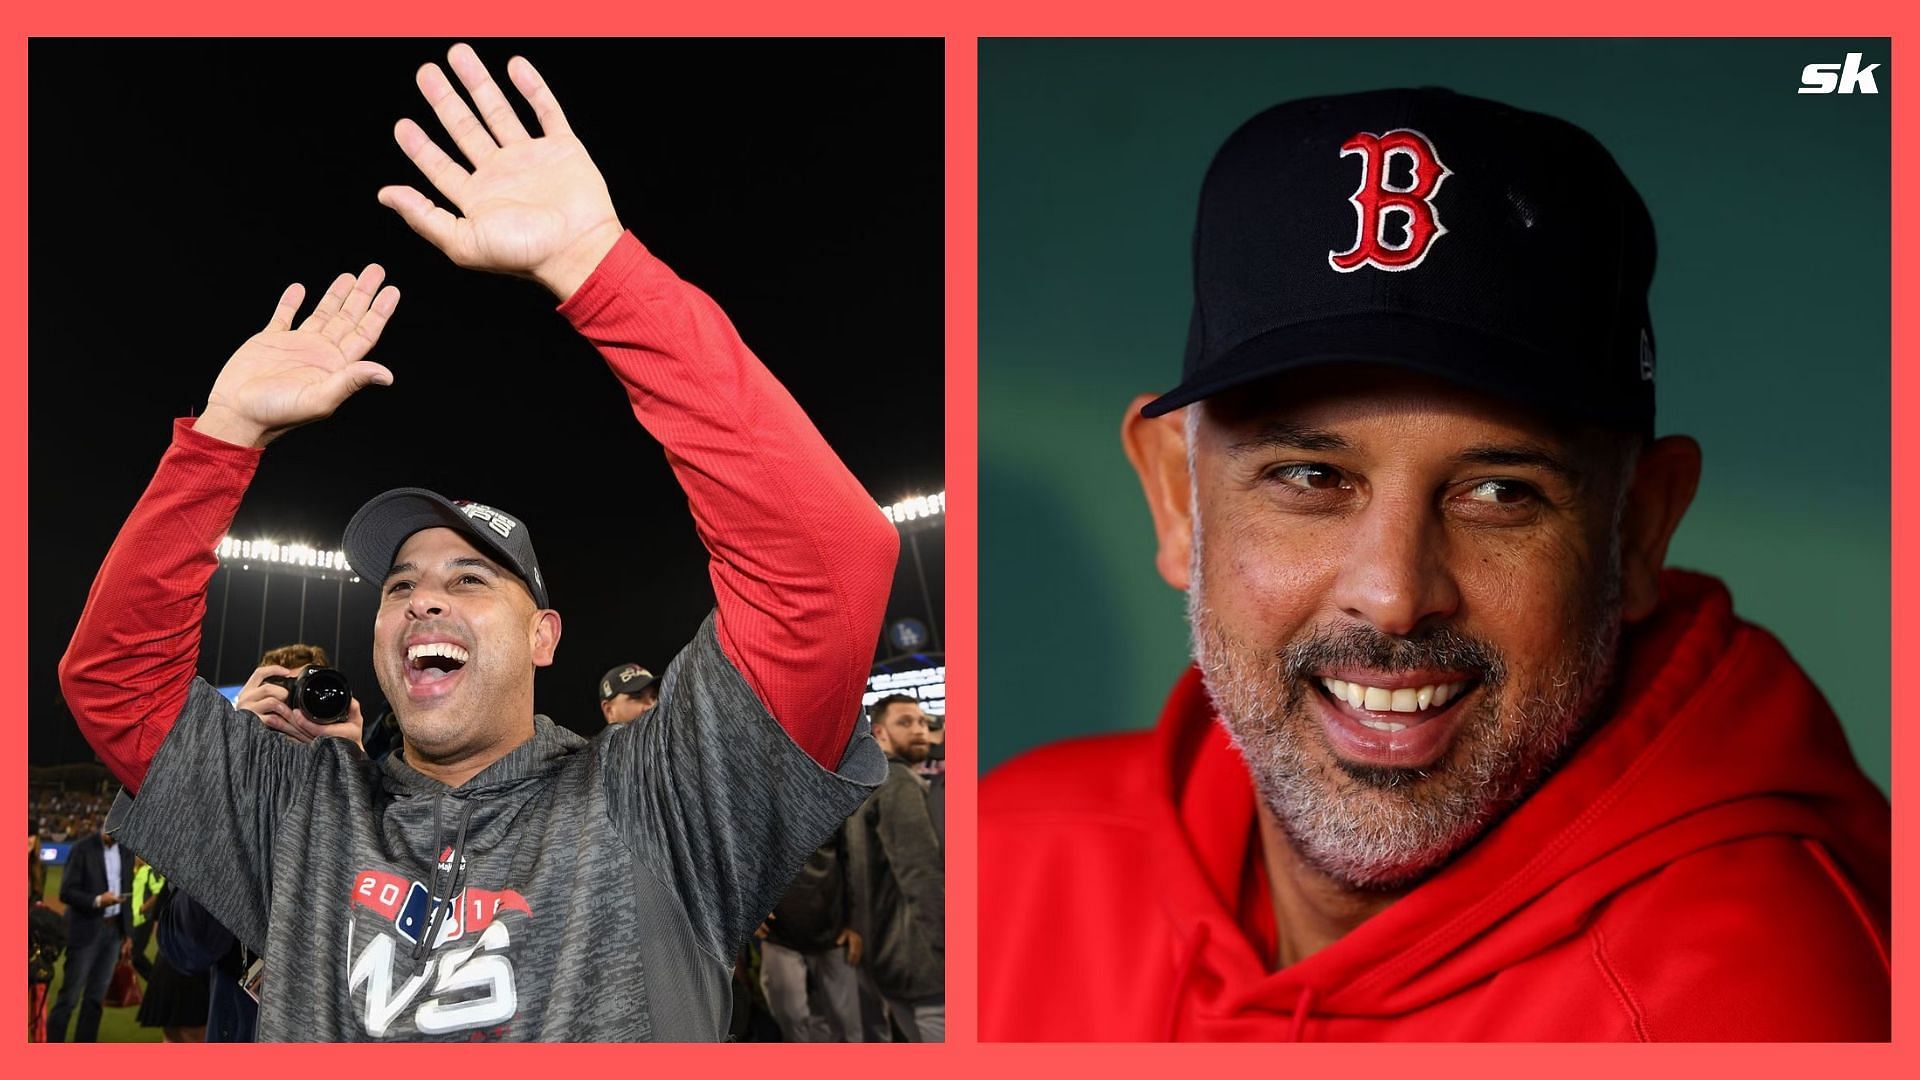 Alex Cora says Red Sox fans have been 'making a difference